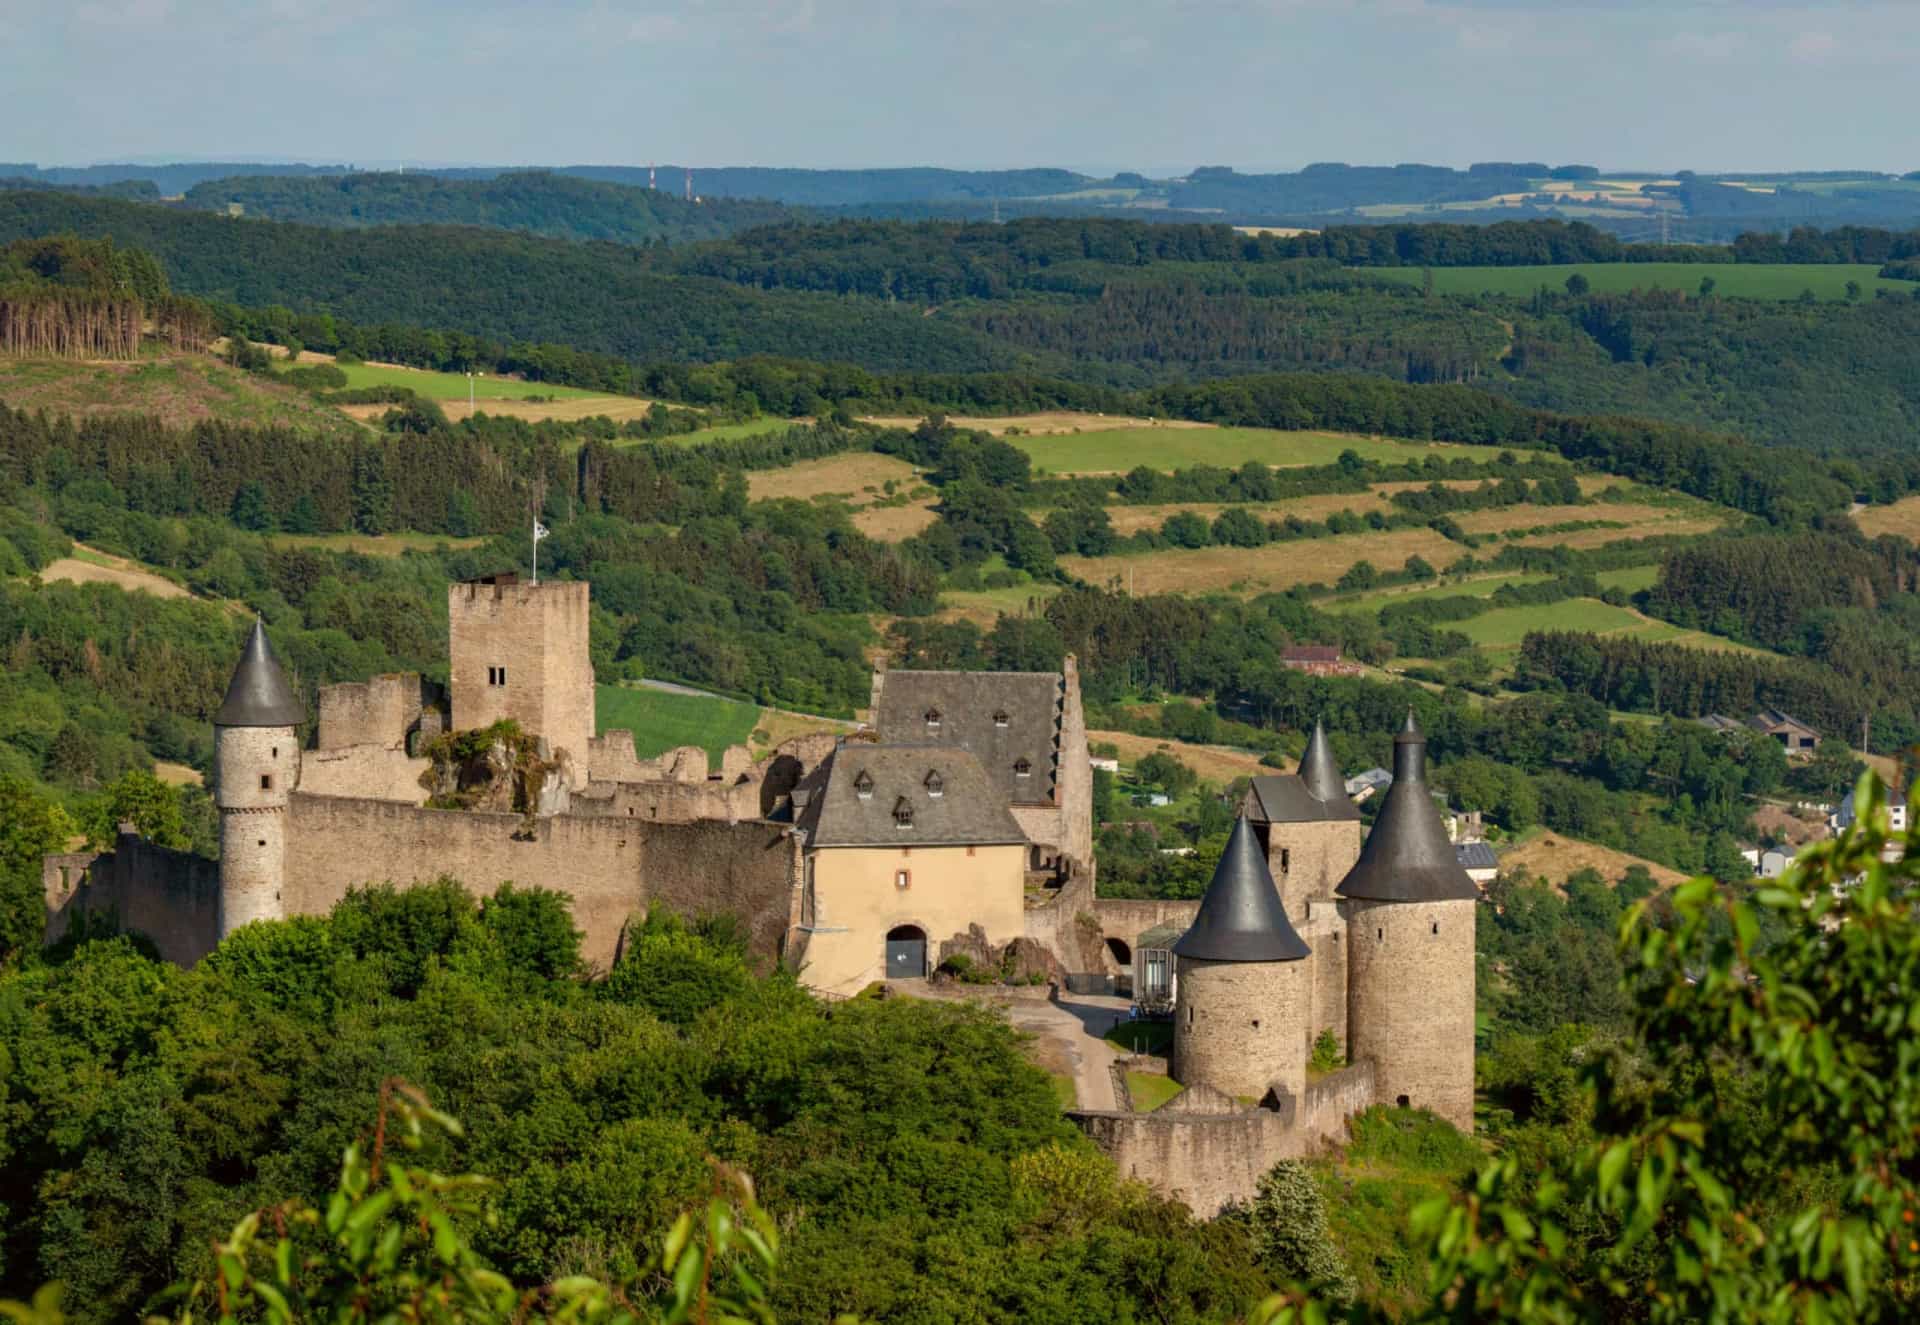 <p>The Luxembourg countryside is dotted with wonderful centuries-old strongholds, including the fairy-tale Bourscheid Castle, which stands majestically over the village of Bourscheid in the country's northeastern region. The castle dates back to the 10th century, its keep enclosed by walls punctuated by 11 watchtowers.</p>